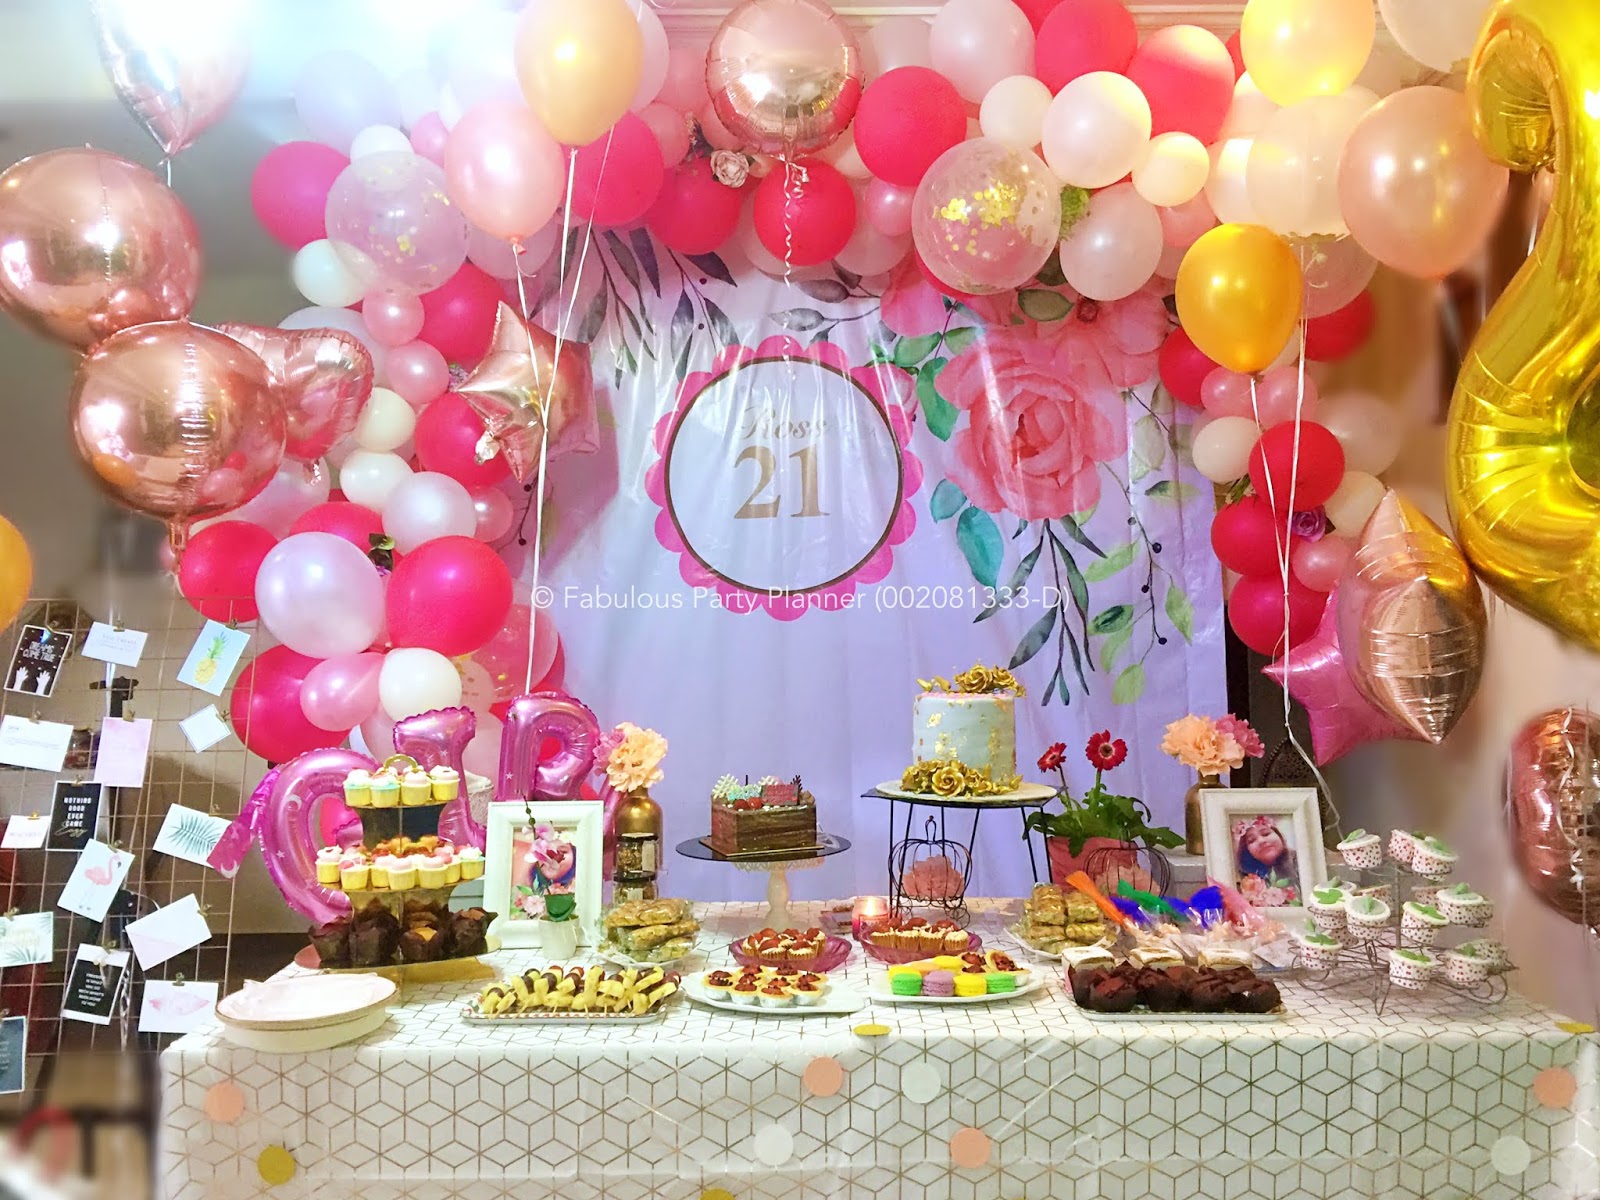 Fabulous Party Planner 002081333 D Event N Kids Party Planner Kuala Lumpur Selangor Malaysia Rose Gold 21st Birthday Party For Rosshini